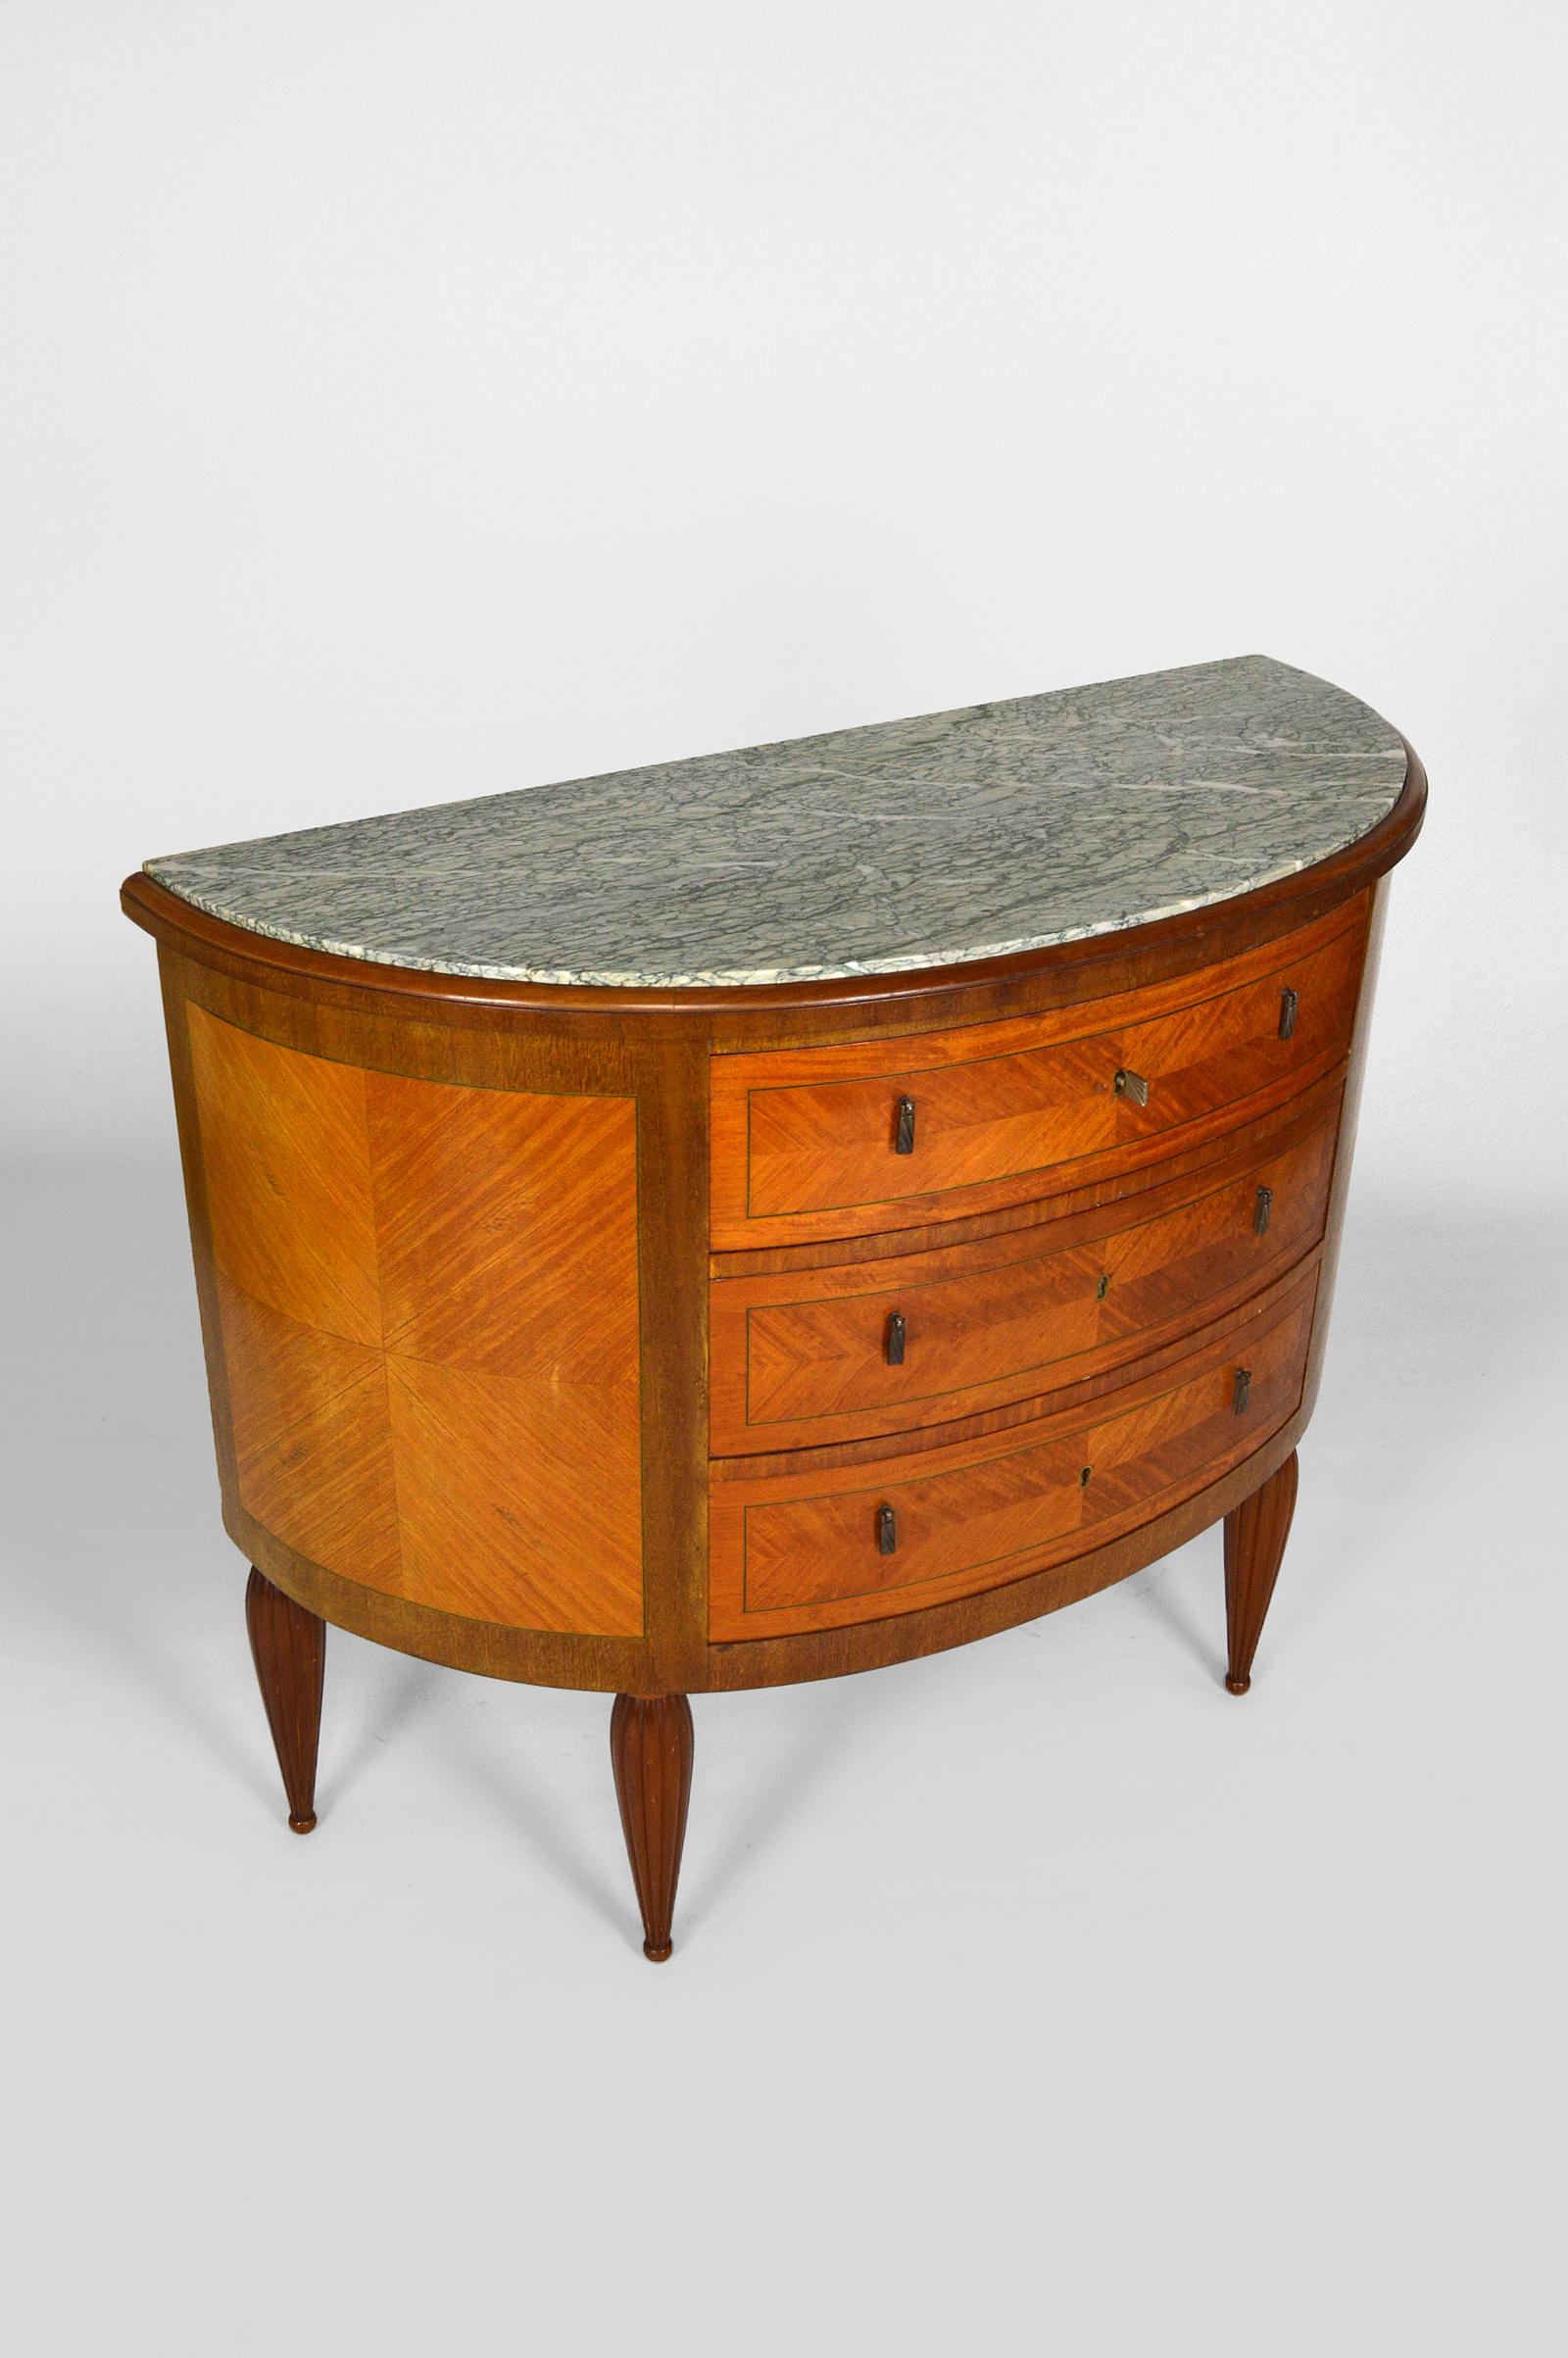 Inlay Art Deco Demilune Mahogany & Marble-Top Commode / Chest of Drawers, circa 1925 For Sale